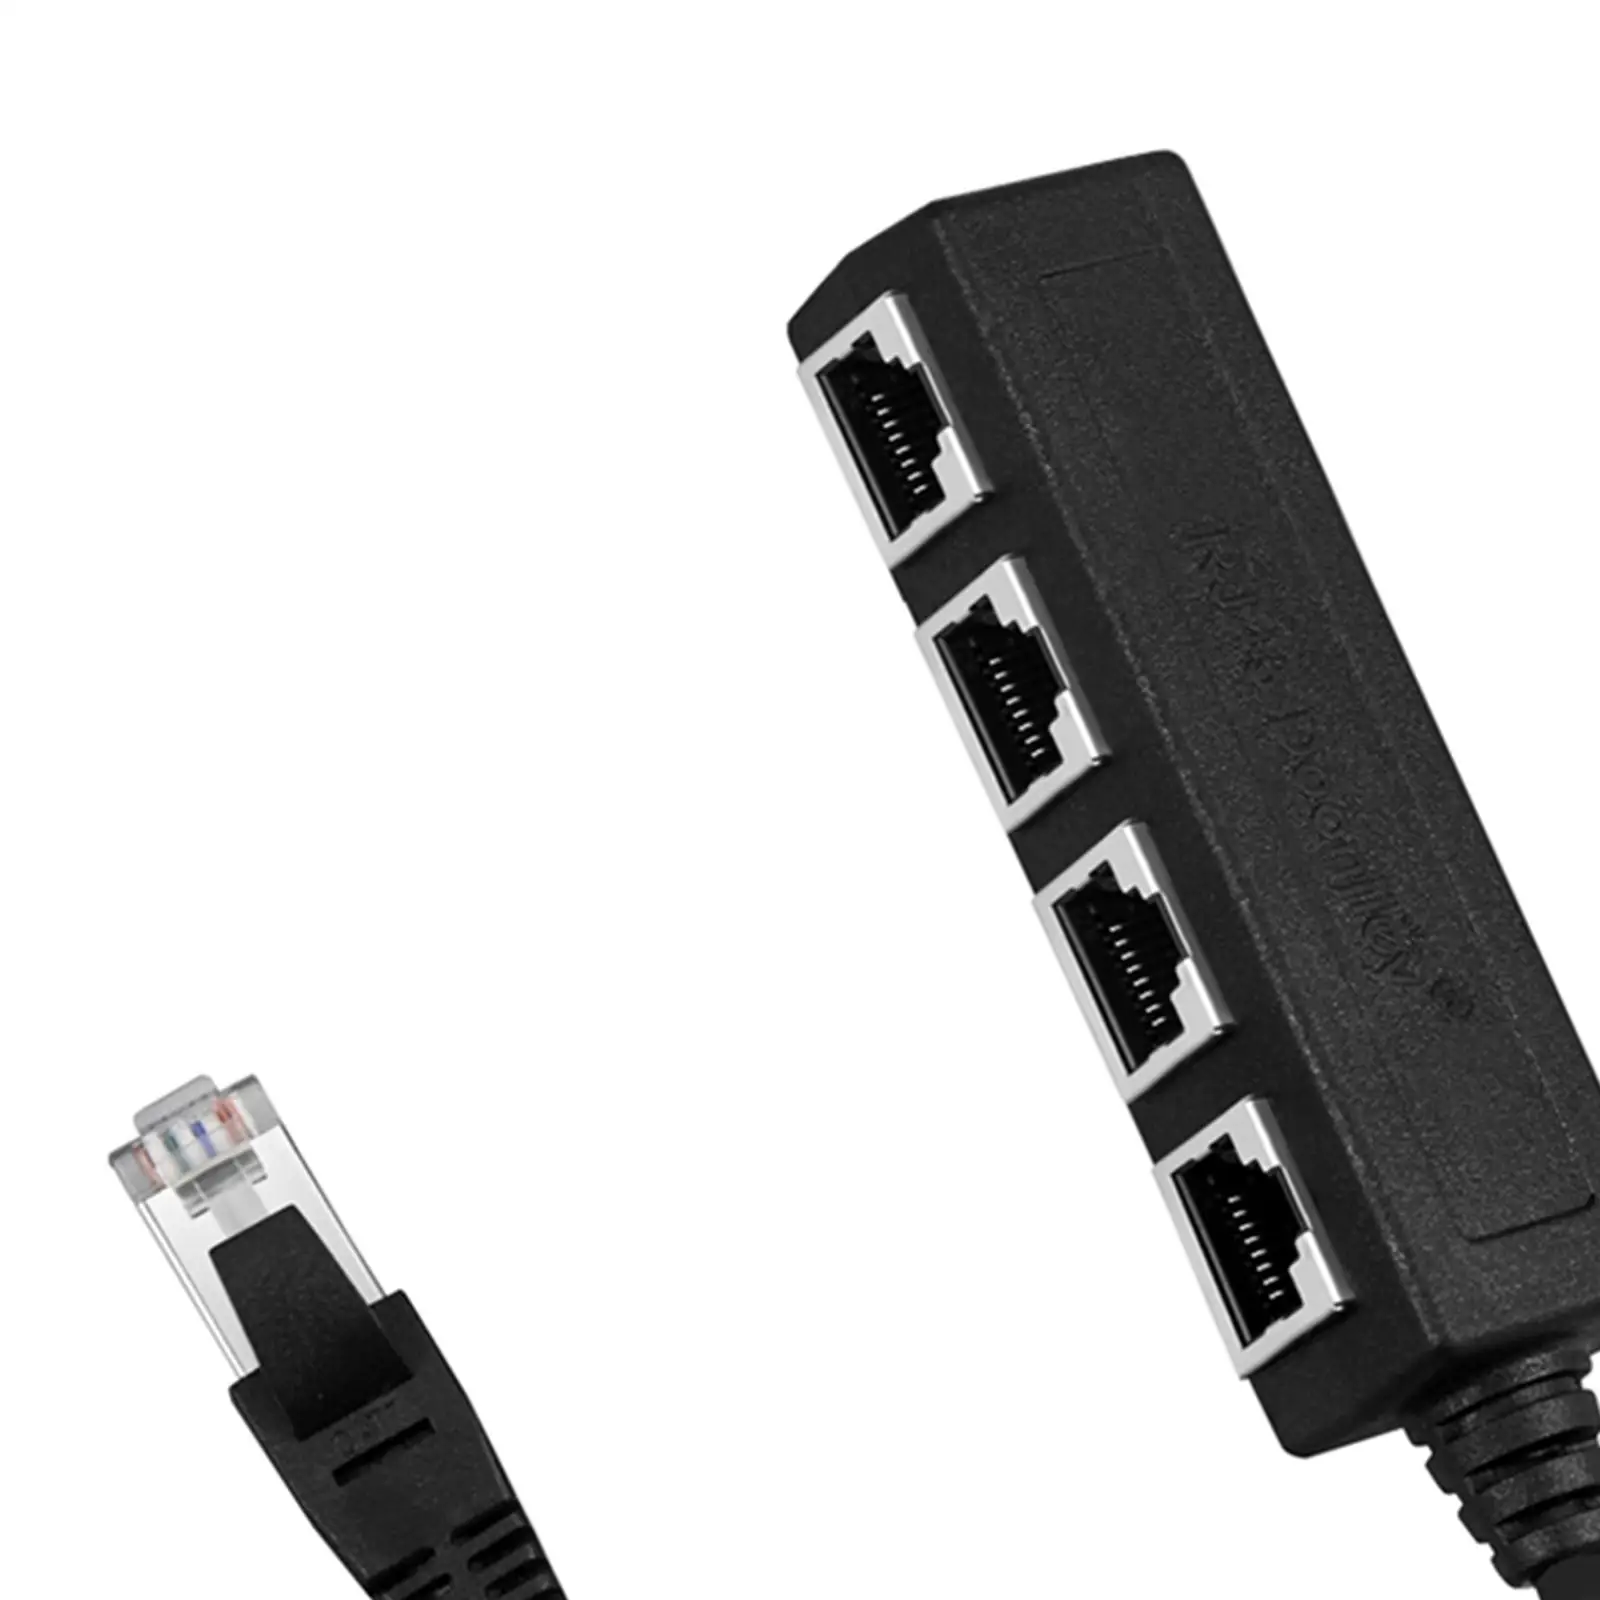 Ethernet Splitter, 1 Male to 4x Female Plug and 1 to 4 Port LAN Network Extension Cable Connector, for Laptop PC Computer.